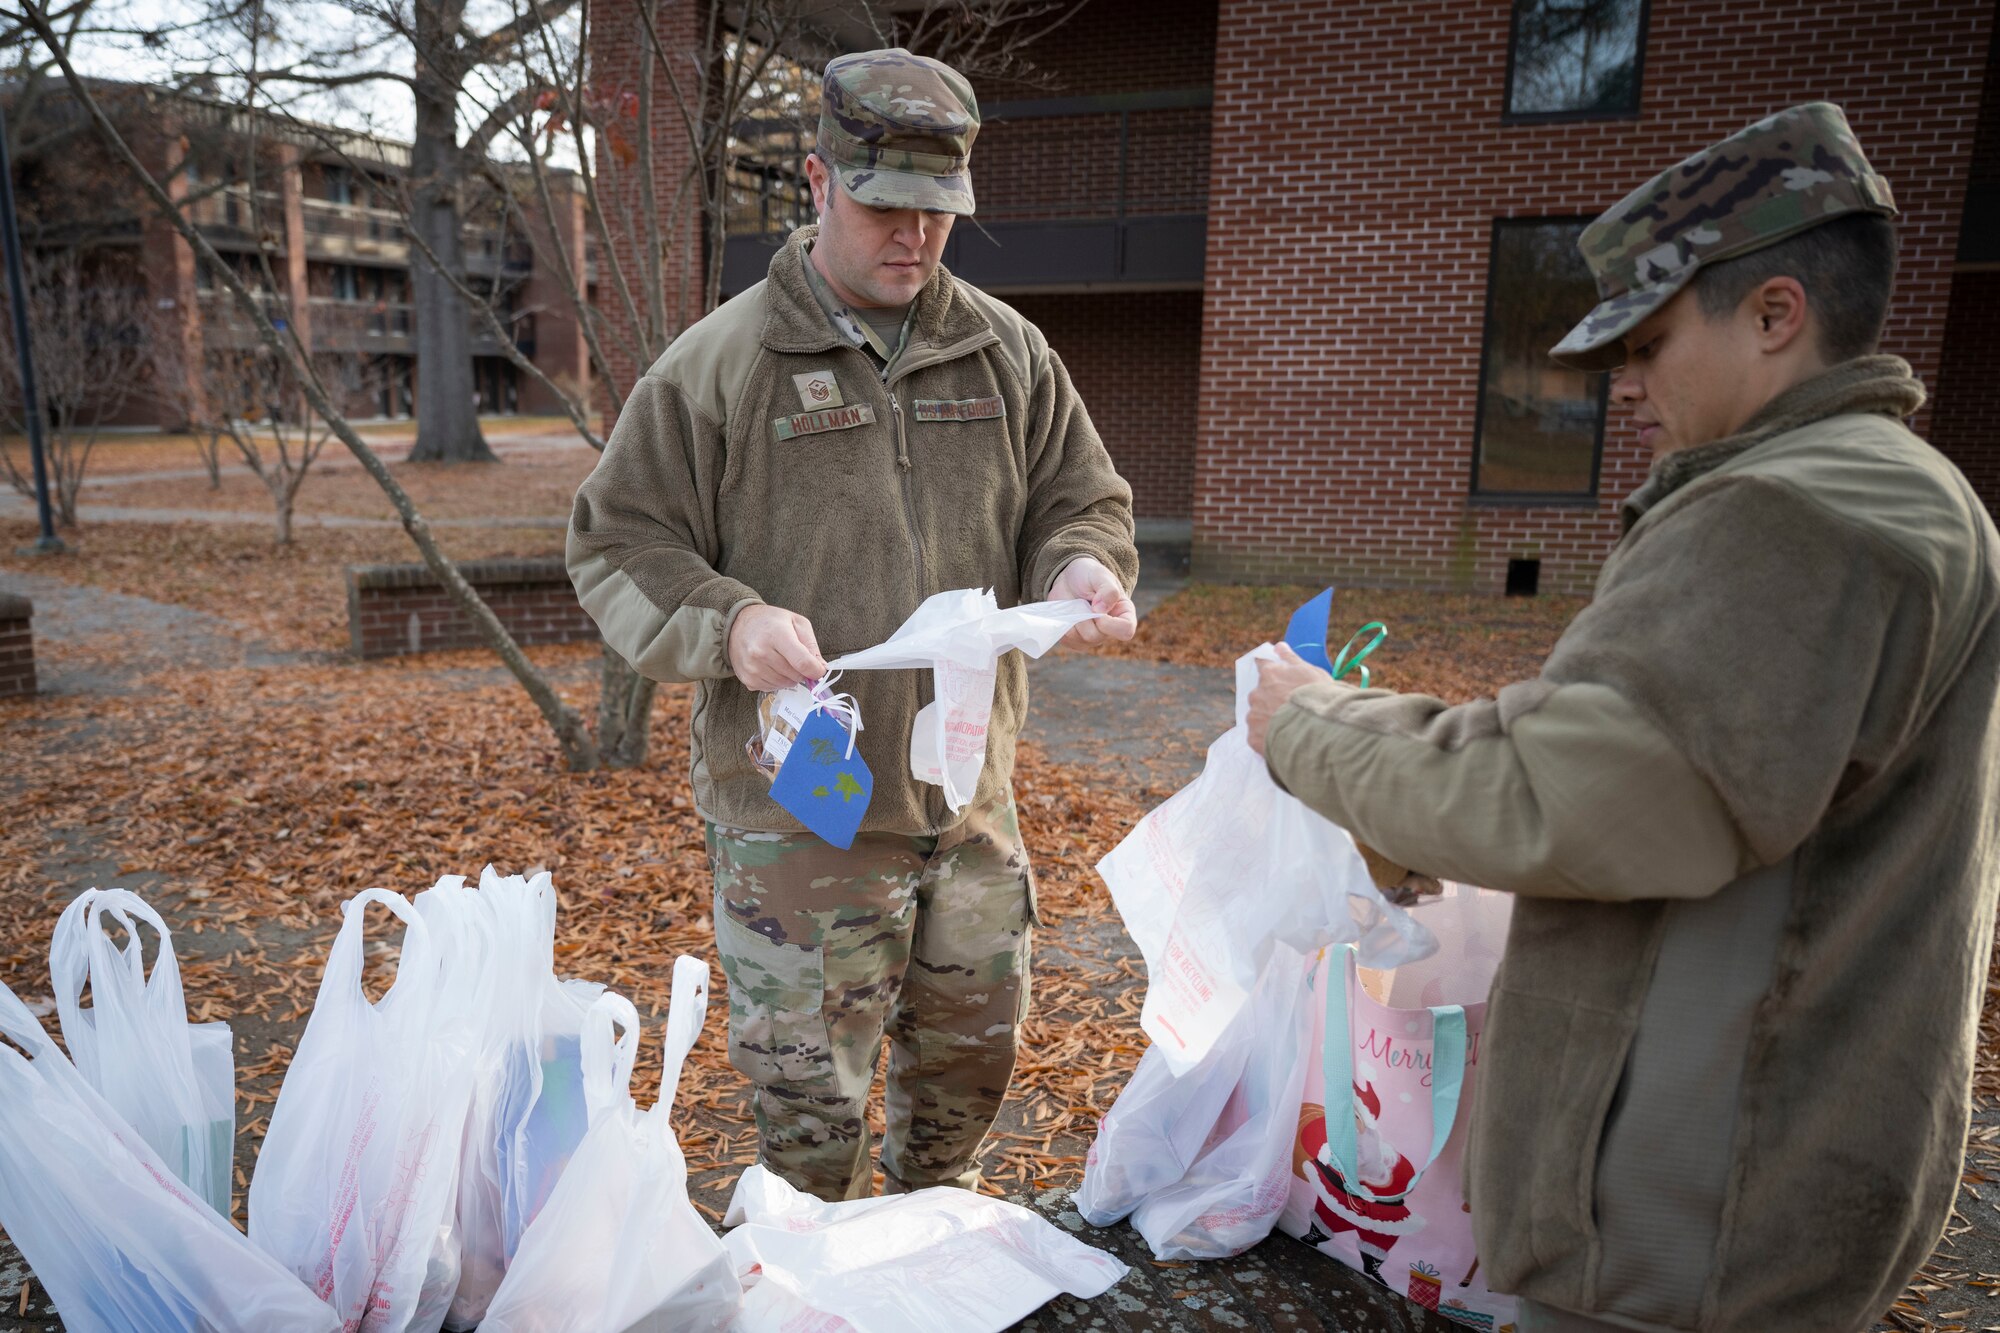 Master Sgt. Brandon Hollman, left, 4th Comptroller Squadron and 4th Force Support Squadron first sergeant, and Master Sgt. Kayleigh McAviney, 335th Fighter Generation Squadron first sergeant, prepare cookie bags for dorm Airmen as part of the annual cookie drive at Seymour Johnson Air Force Base, North Carolina, Dec. 5, 2022. The cookies were distributed to 600 Airmen.